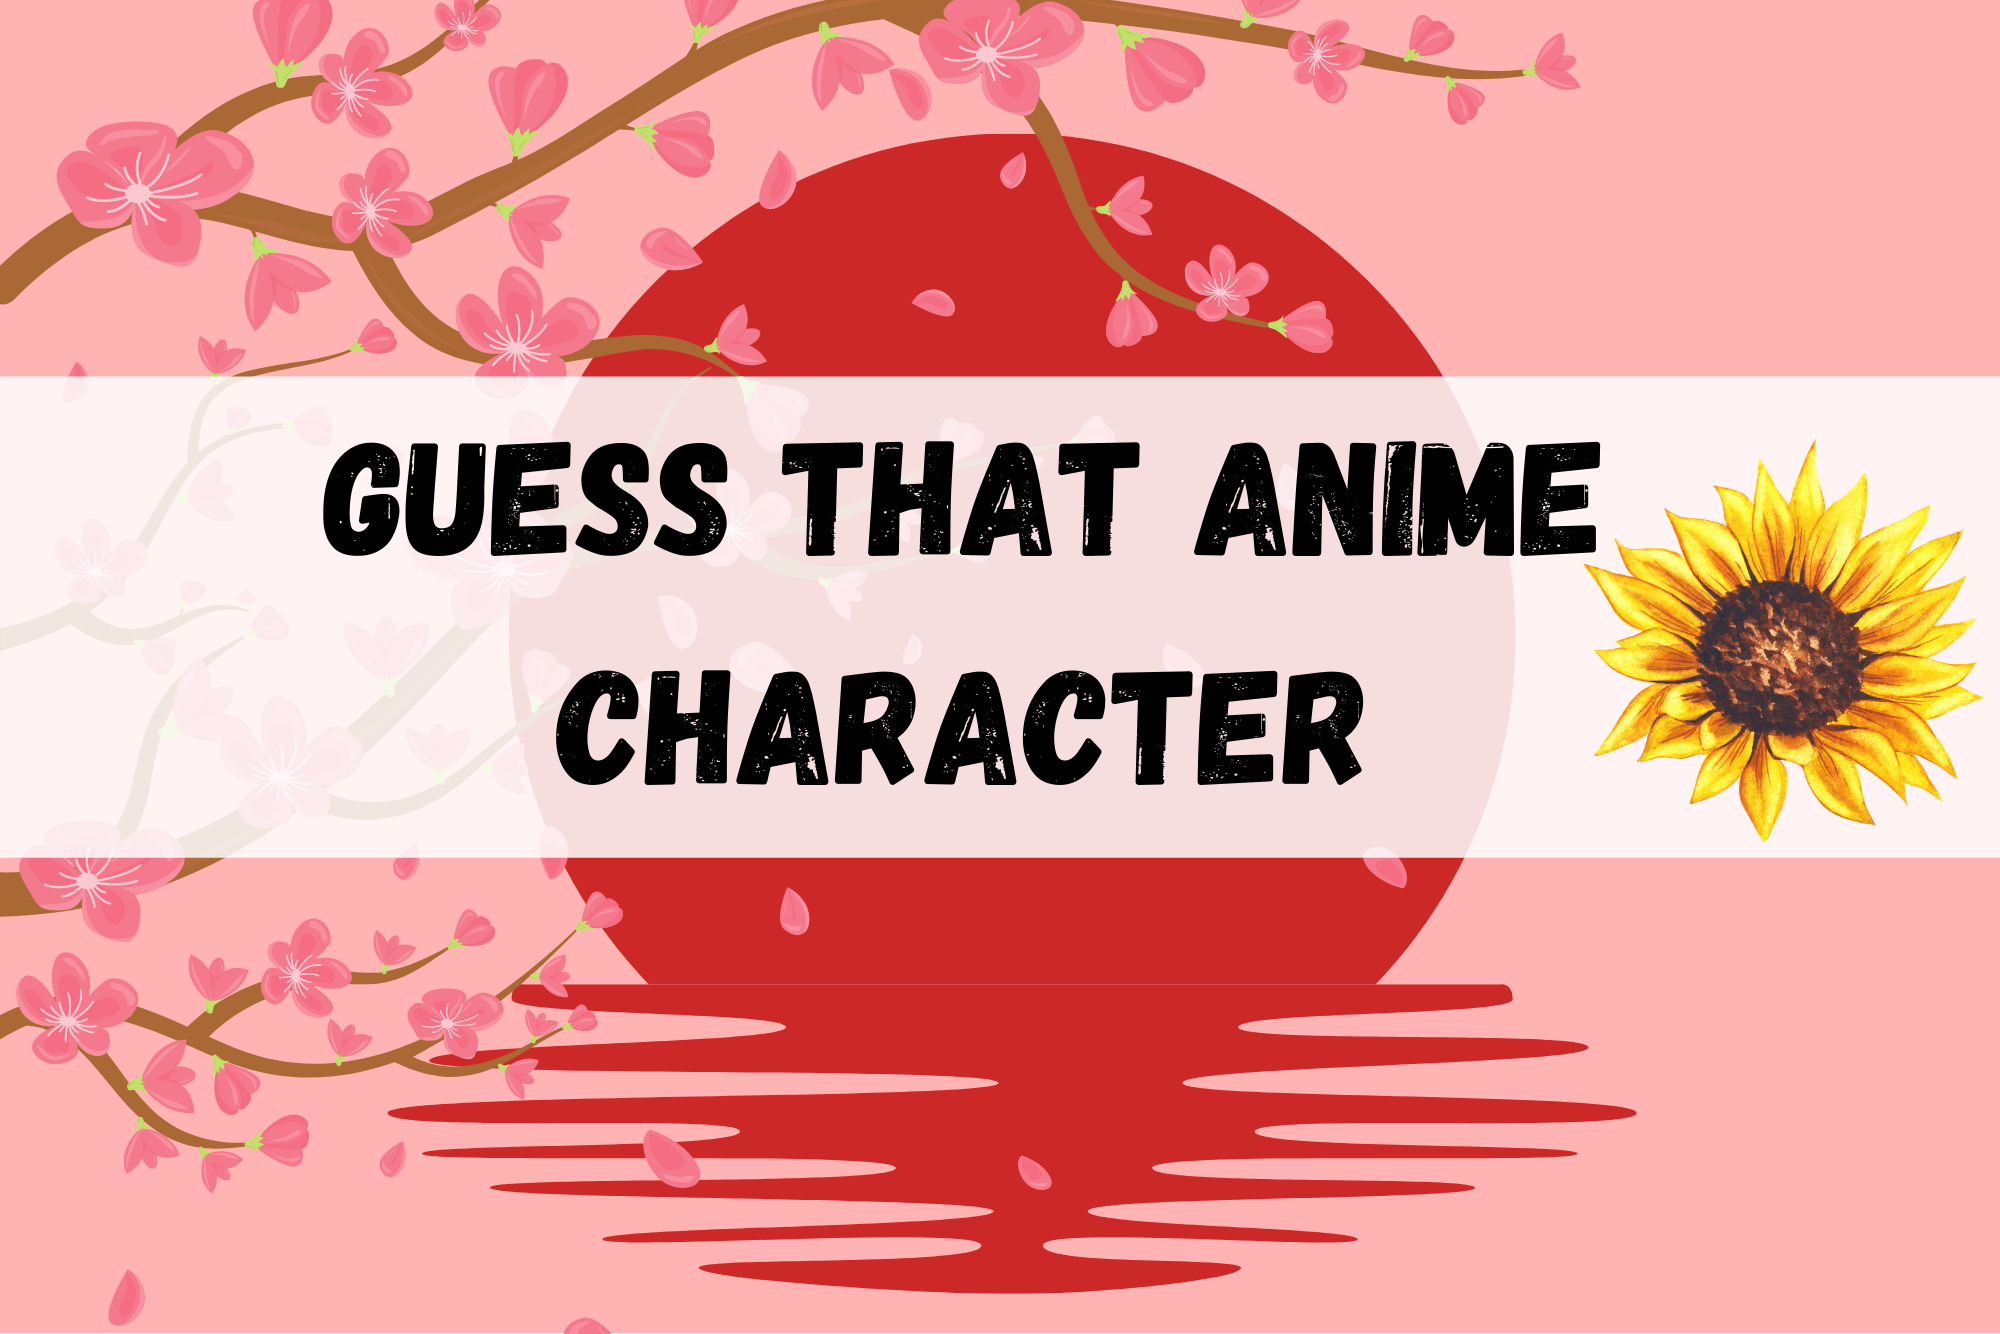 Anime Characters by One Word Descriptions Quiz - By MayorD